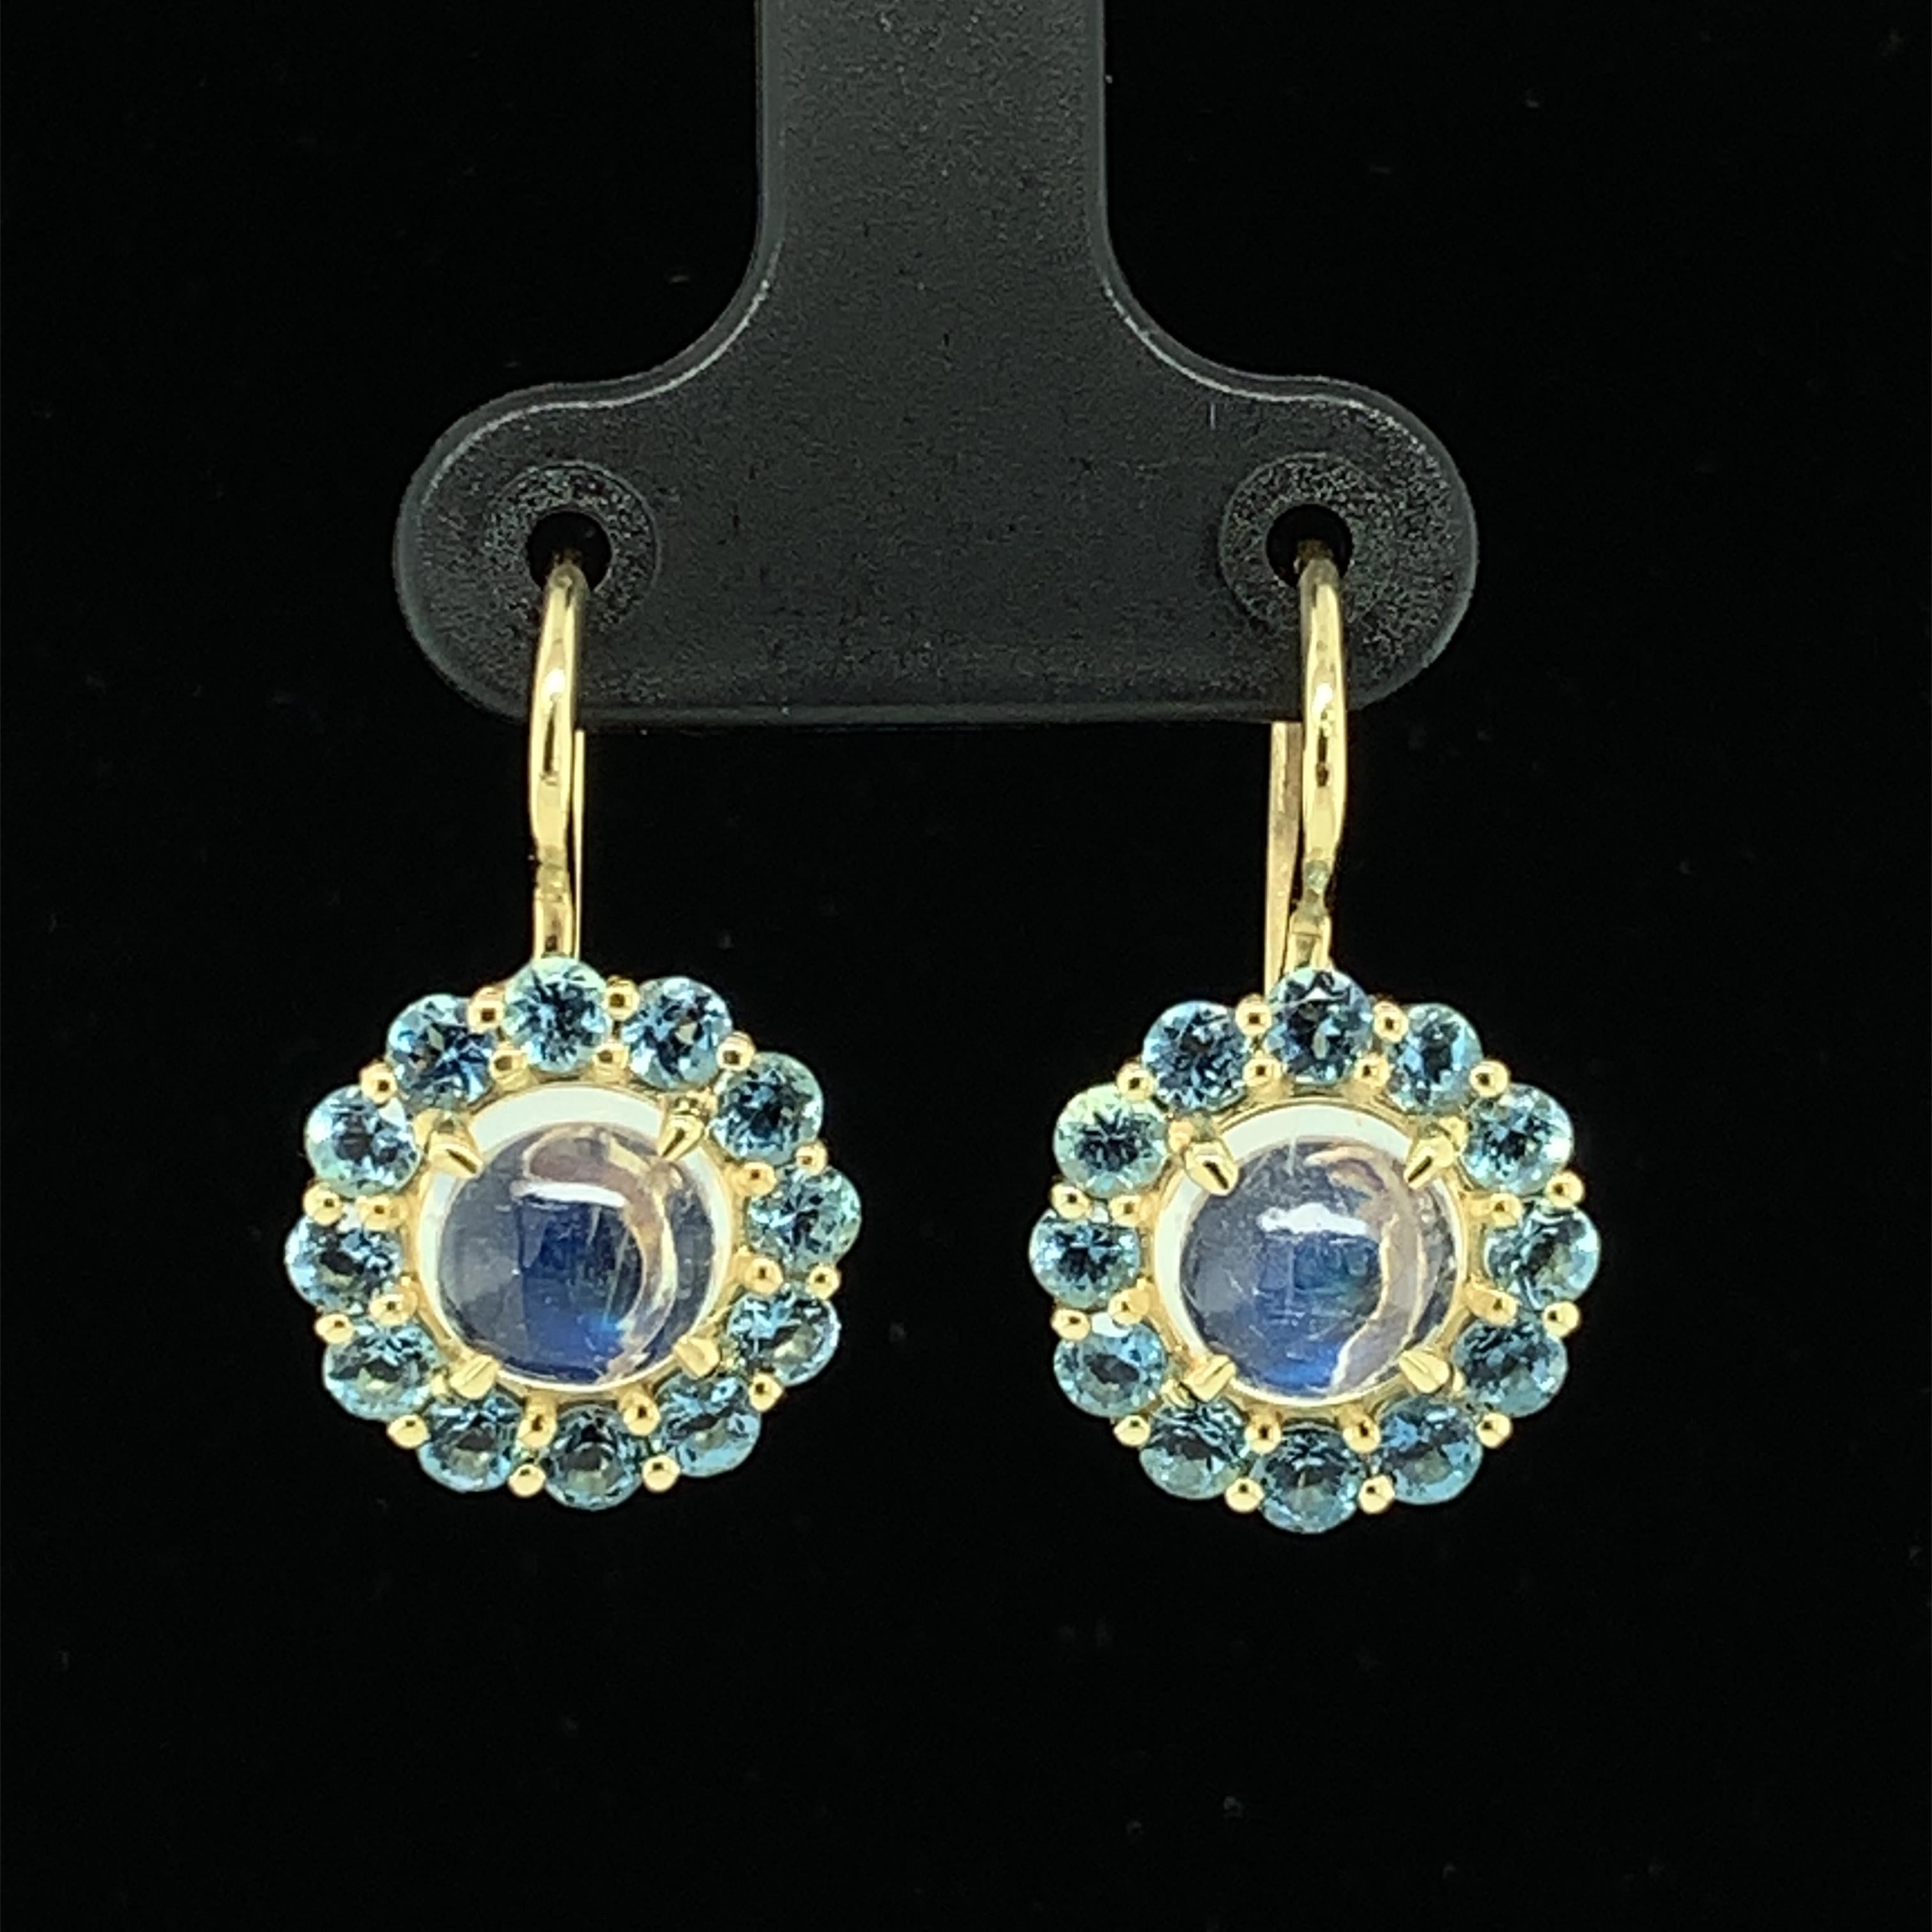 These 18k yellow gold handmade drop earrings feature lovely “blue flash” moonstones and Santa Maria Mine aquamarines. Santa Maria aquamarines are in a class by themselves - prized for their rare and striking depth of color. These earrings are the